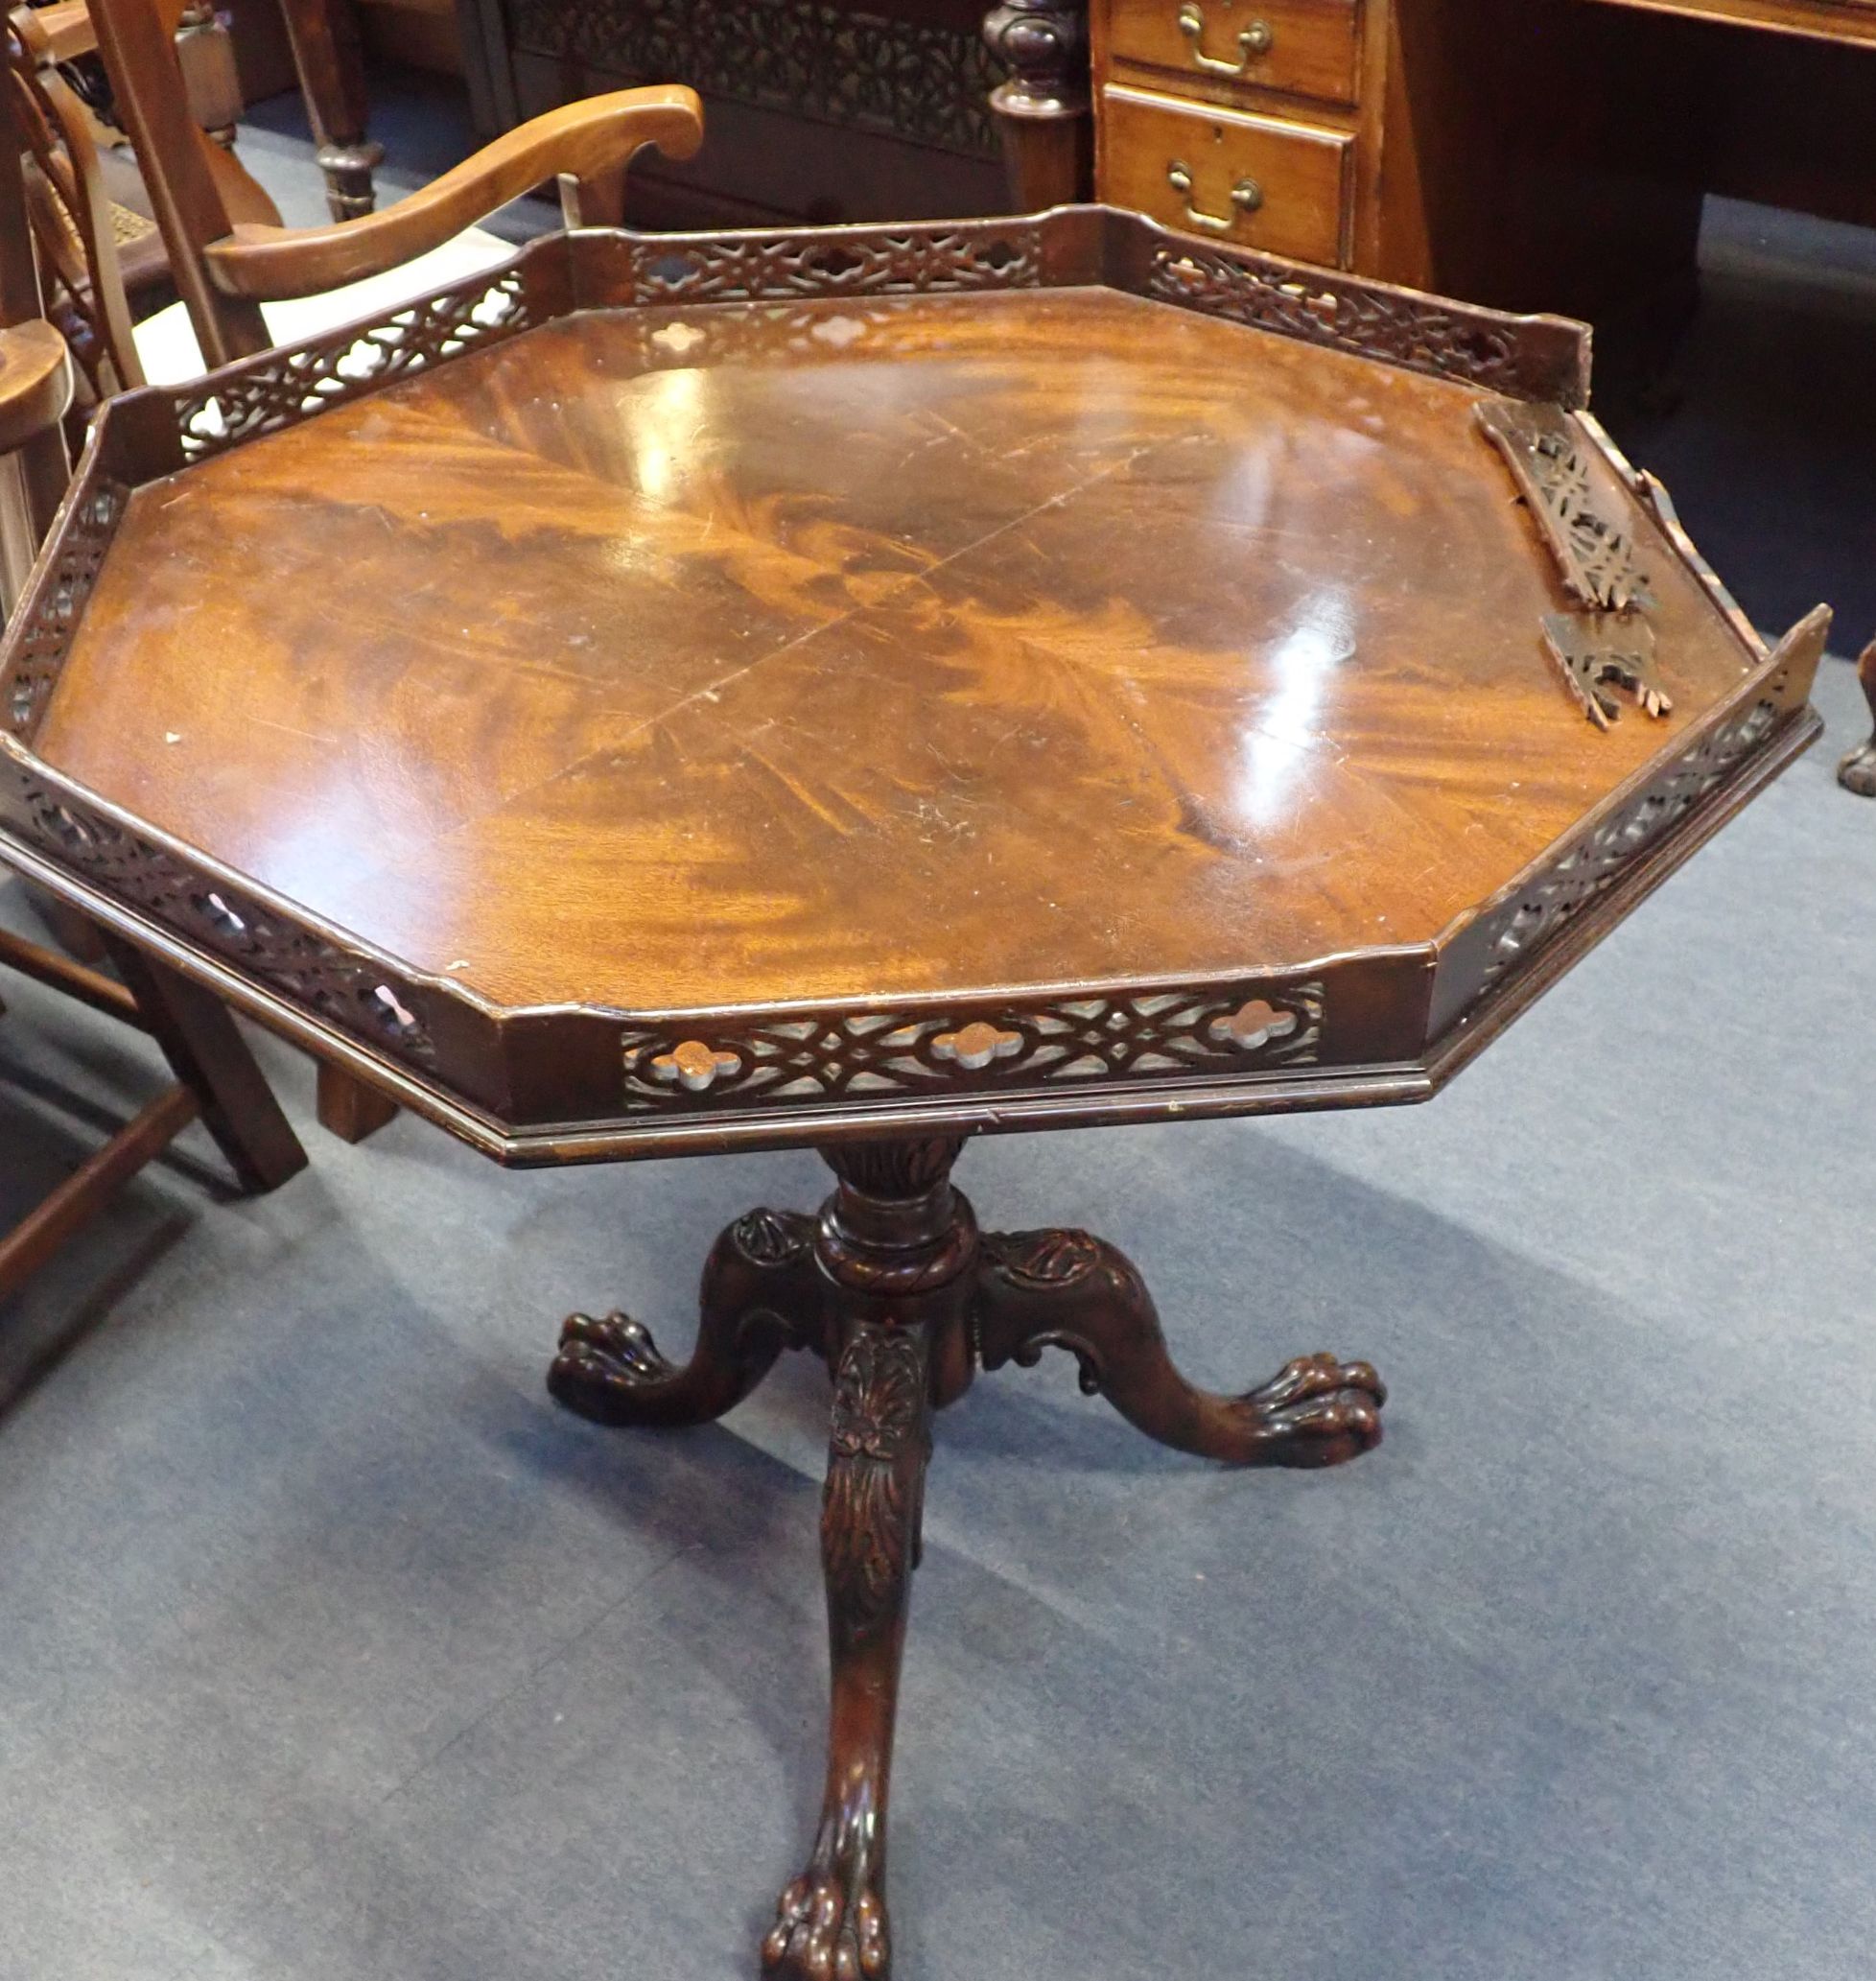 AN 18TH CENTURY STYLE MAHOGANY TILT-TOP TABLE - Image 2 of 2